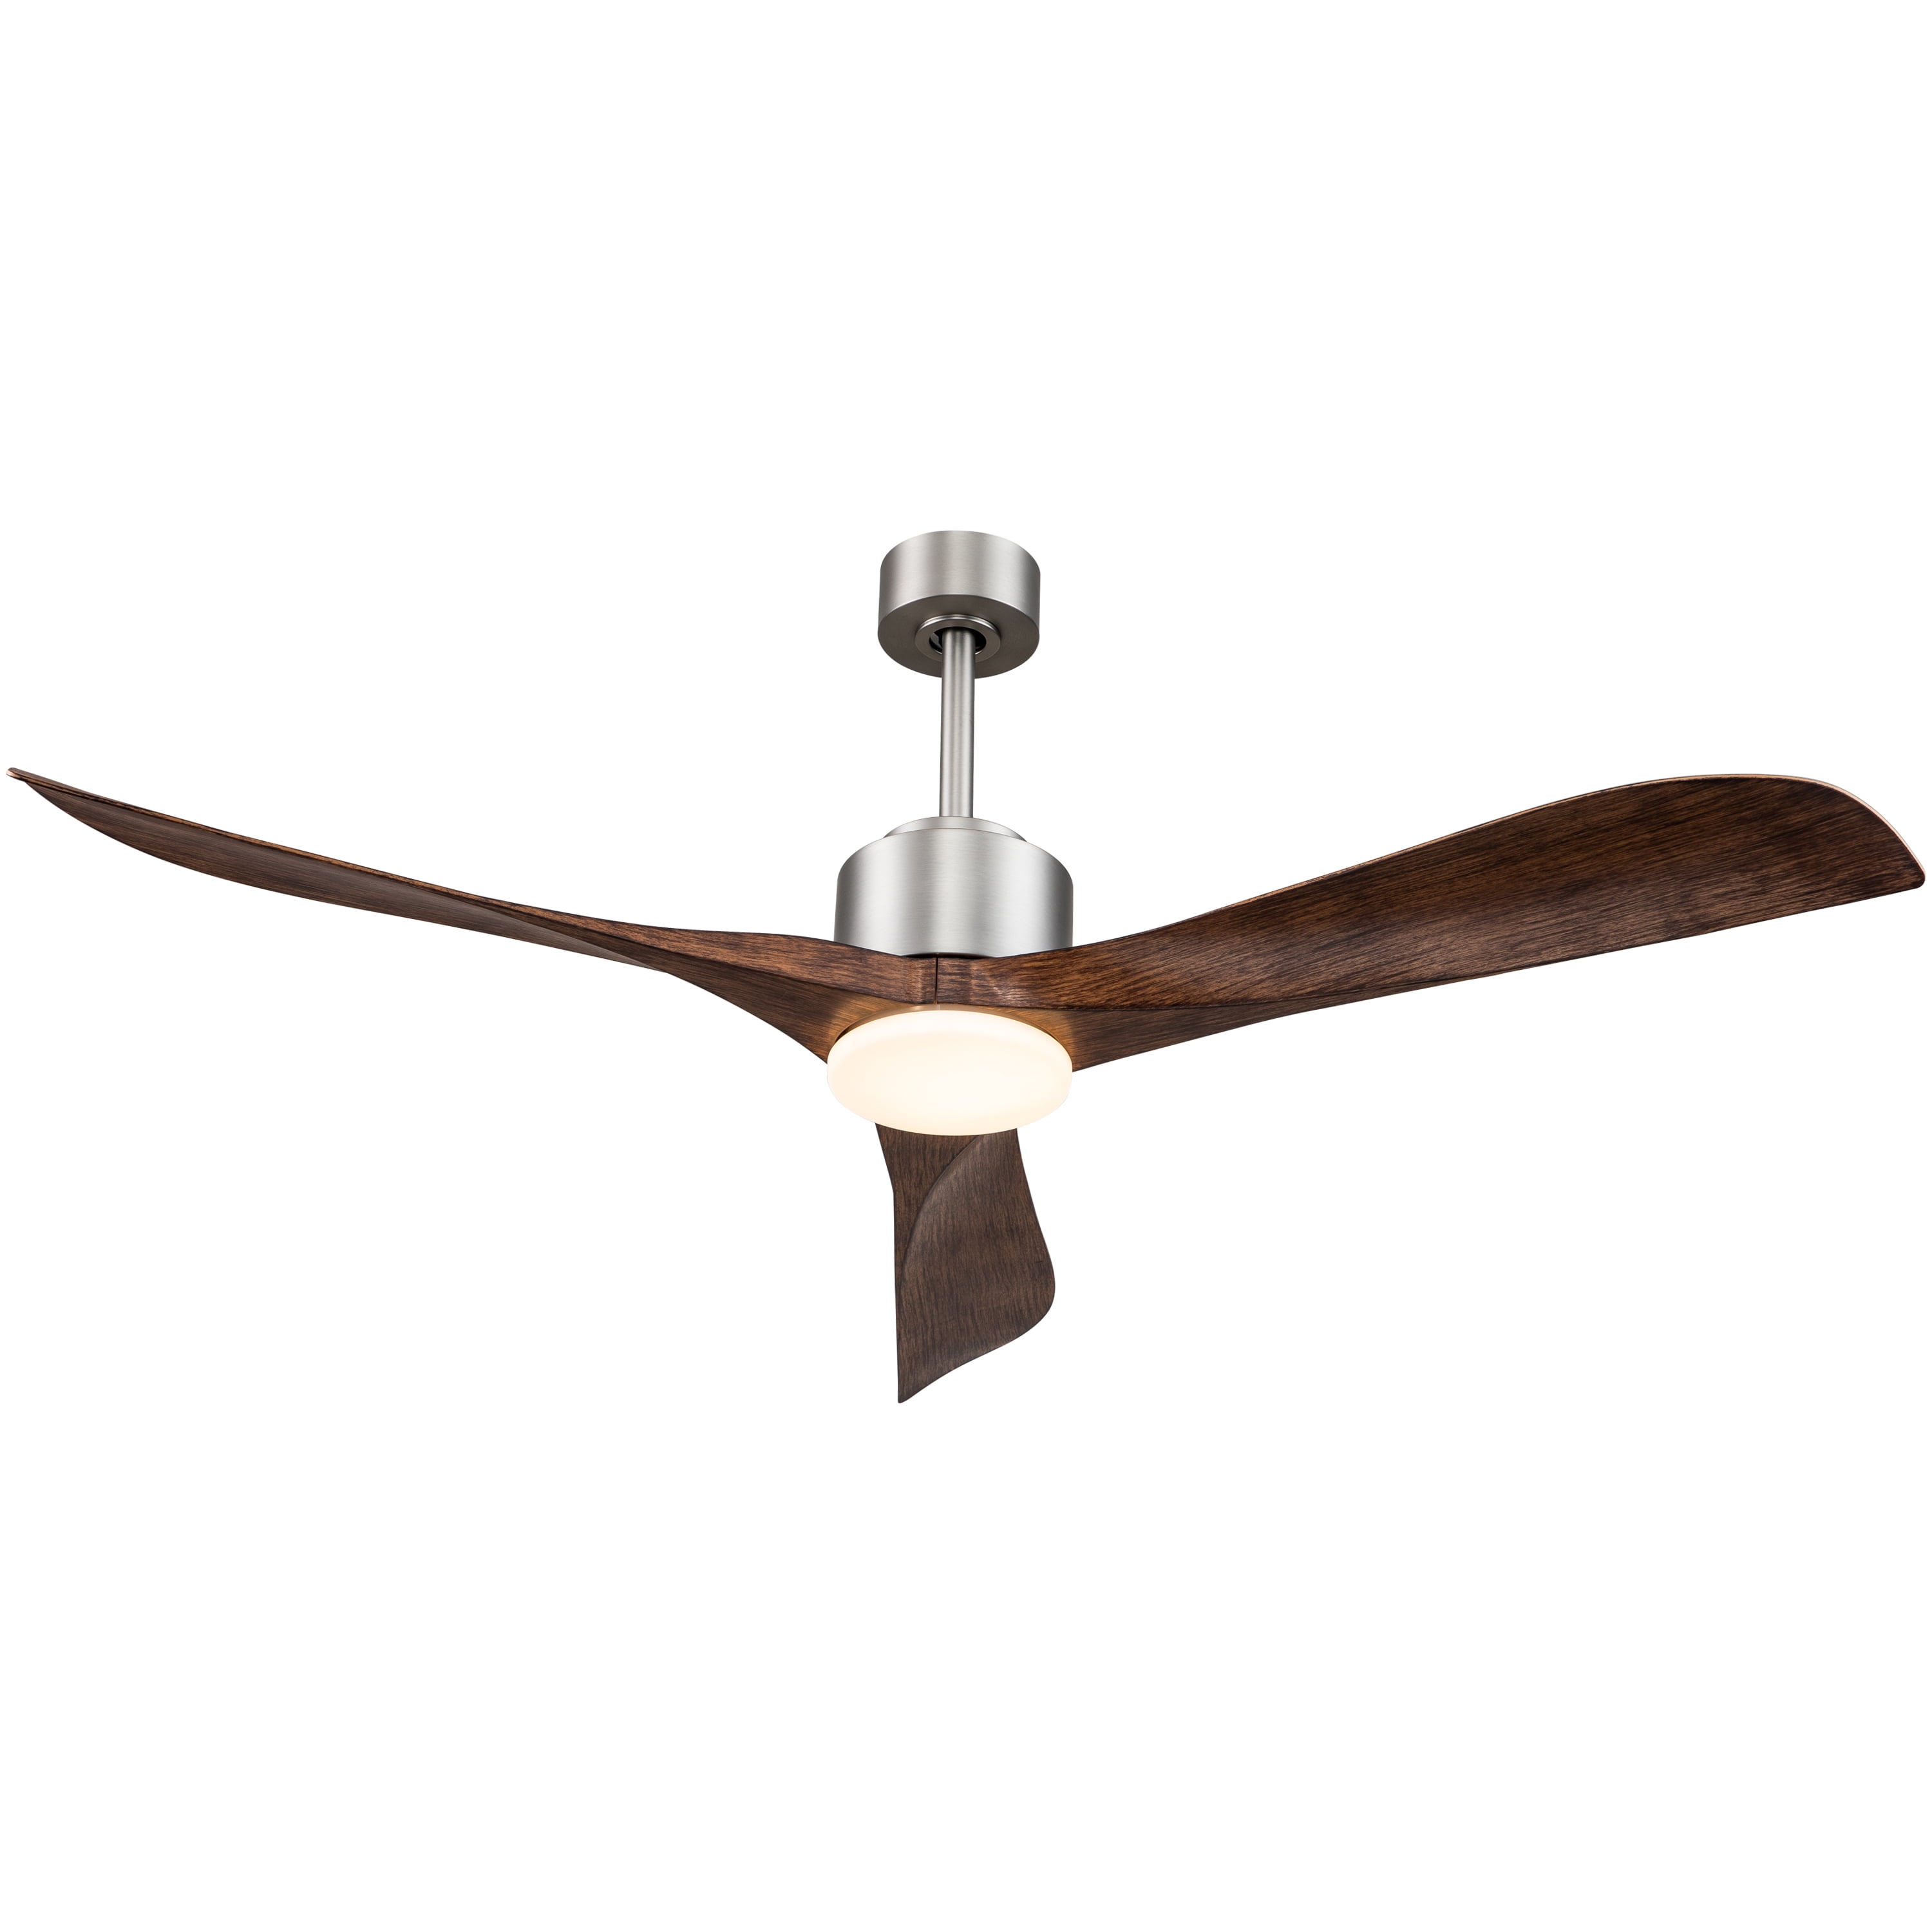 w/ LED Light Remote Control Nickel 52" 56'' Indoor Ceiling Fan Bronze finish 